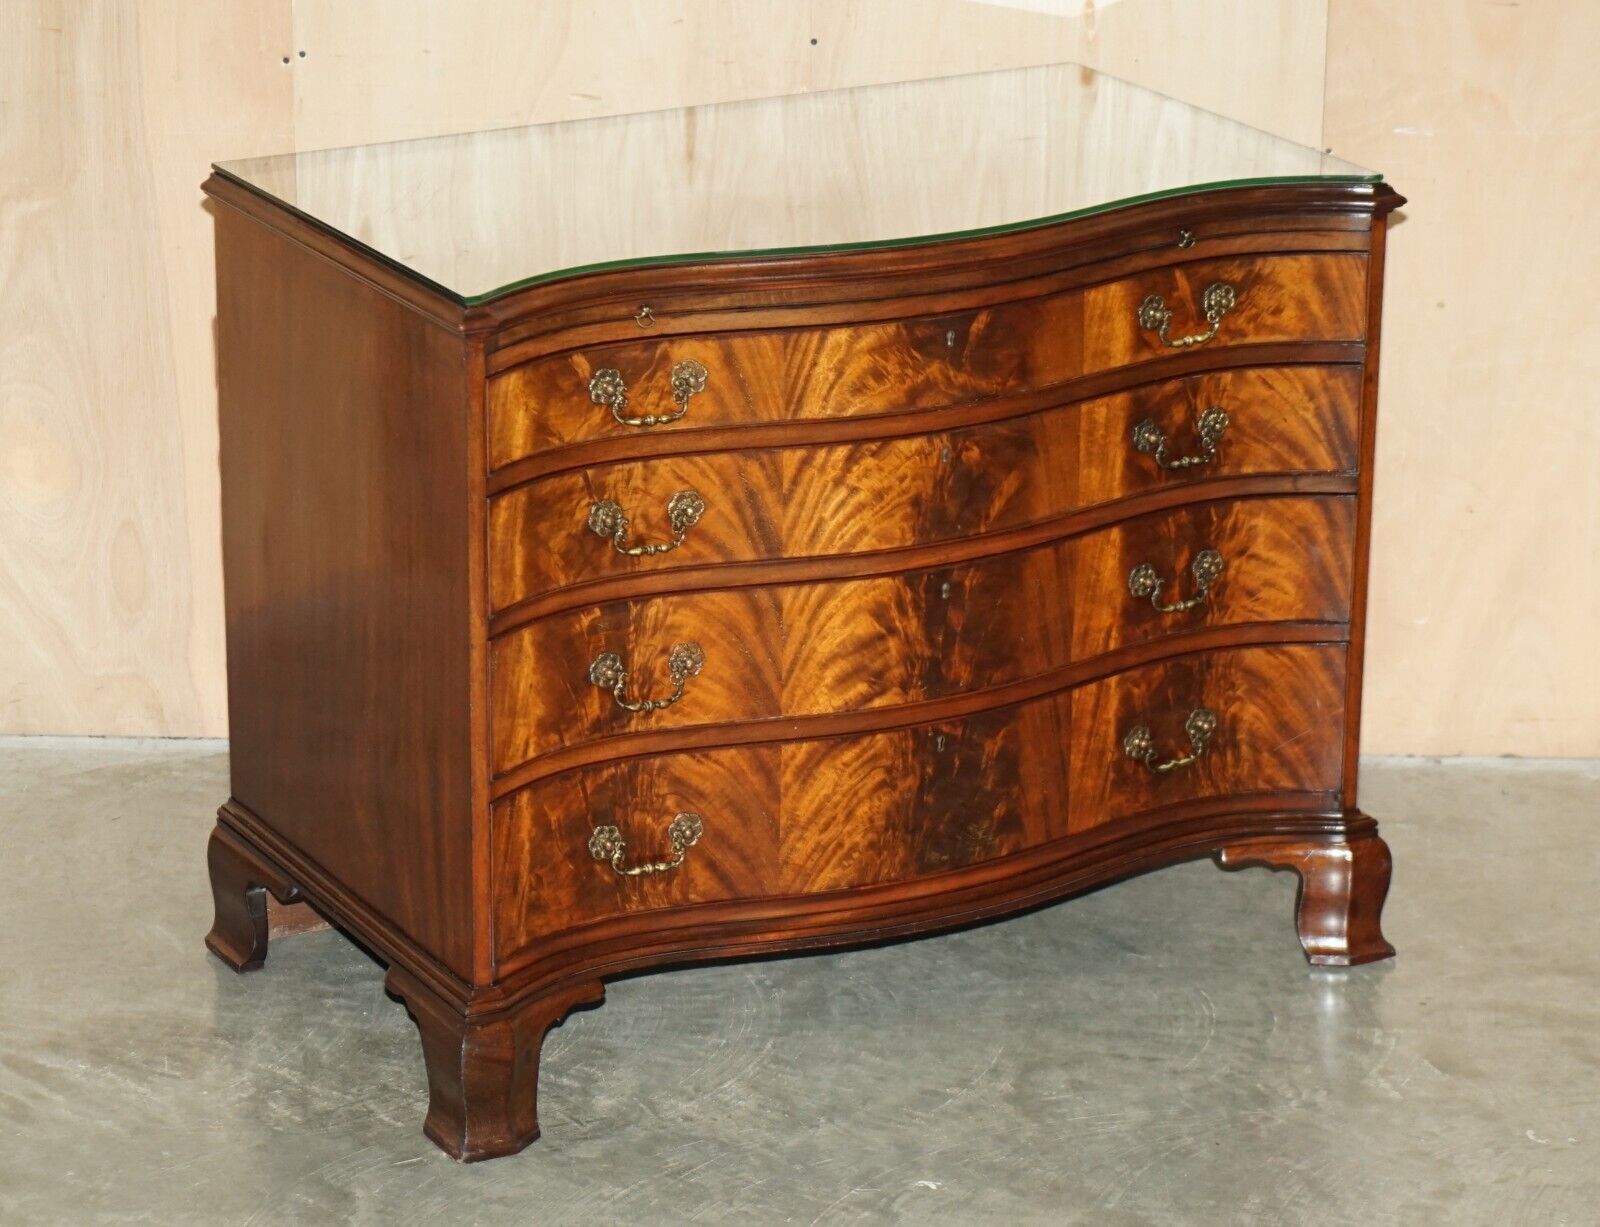 STUNNING FLAMED MAHOGANY HOWARD & SON'S SERPENTINE FRONTED CHEST OF DRAWERS